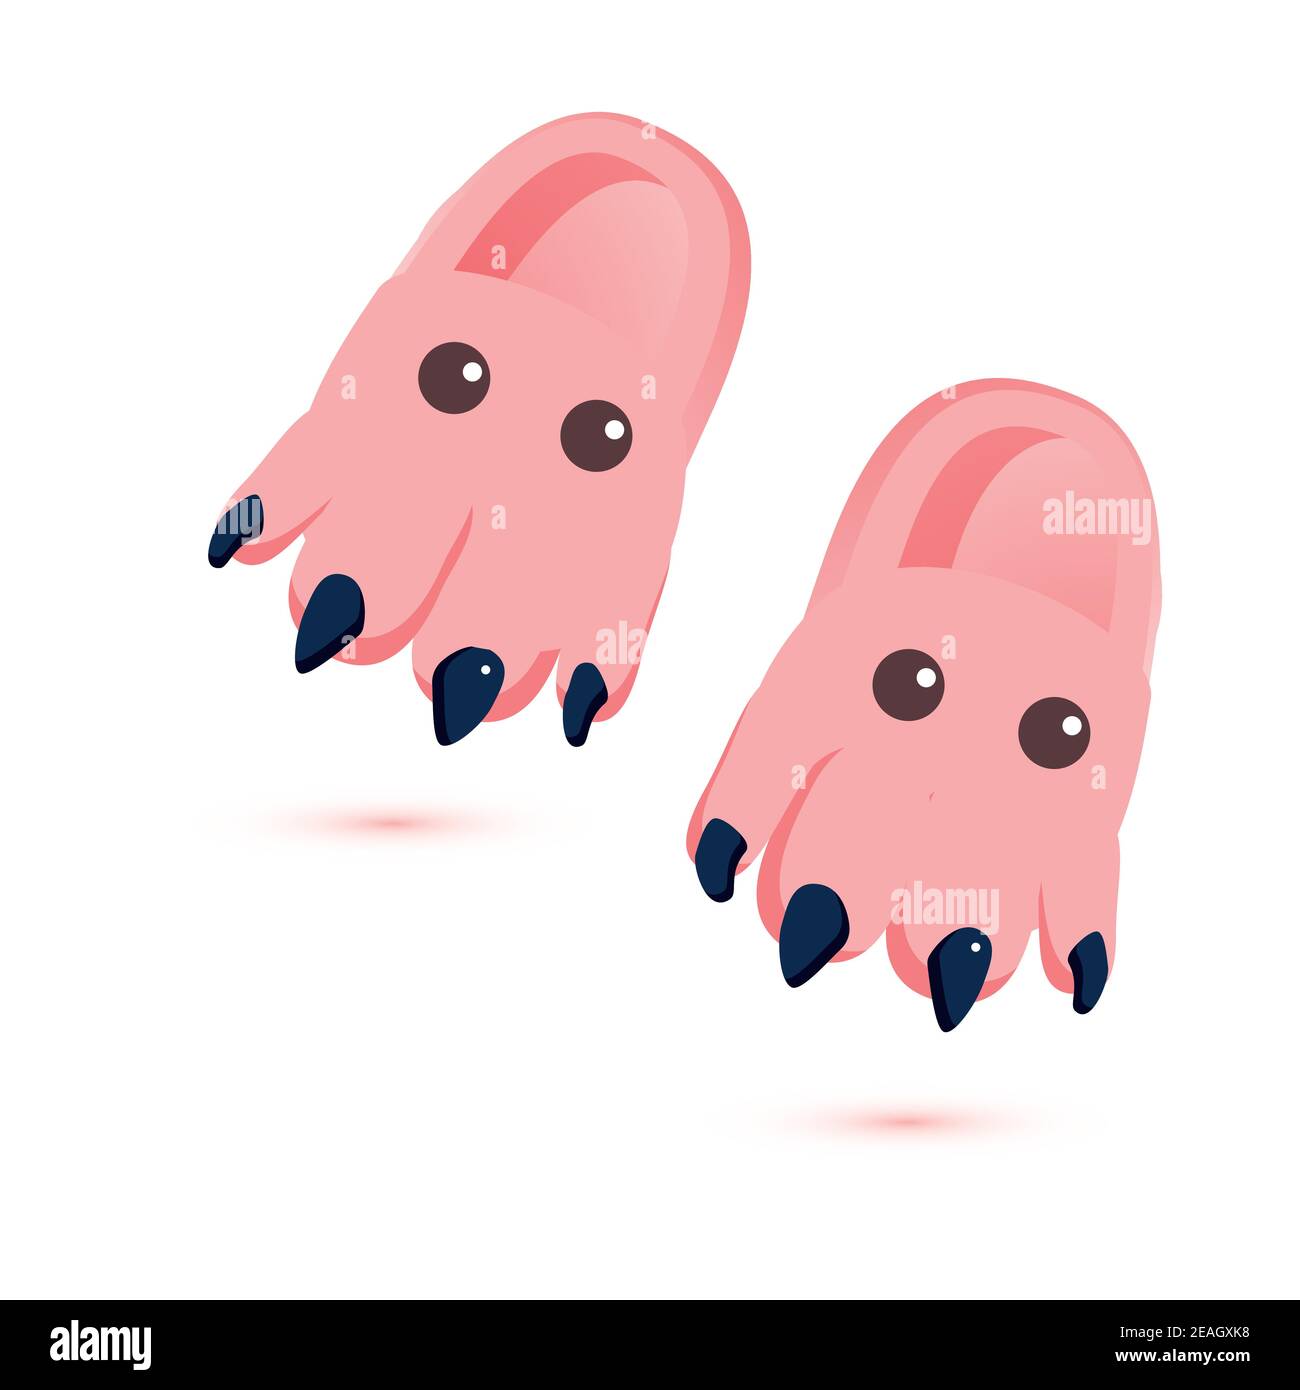 Pair of Home Children's Slippers Isolated on White. Vector Illustration. Slippers Icons. Cute Slippers in the Form of a Dinosaur with Eyes. Home Shoes Stock Vector